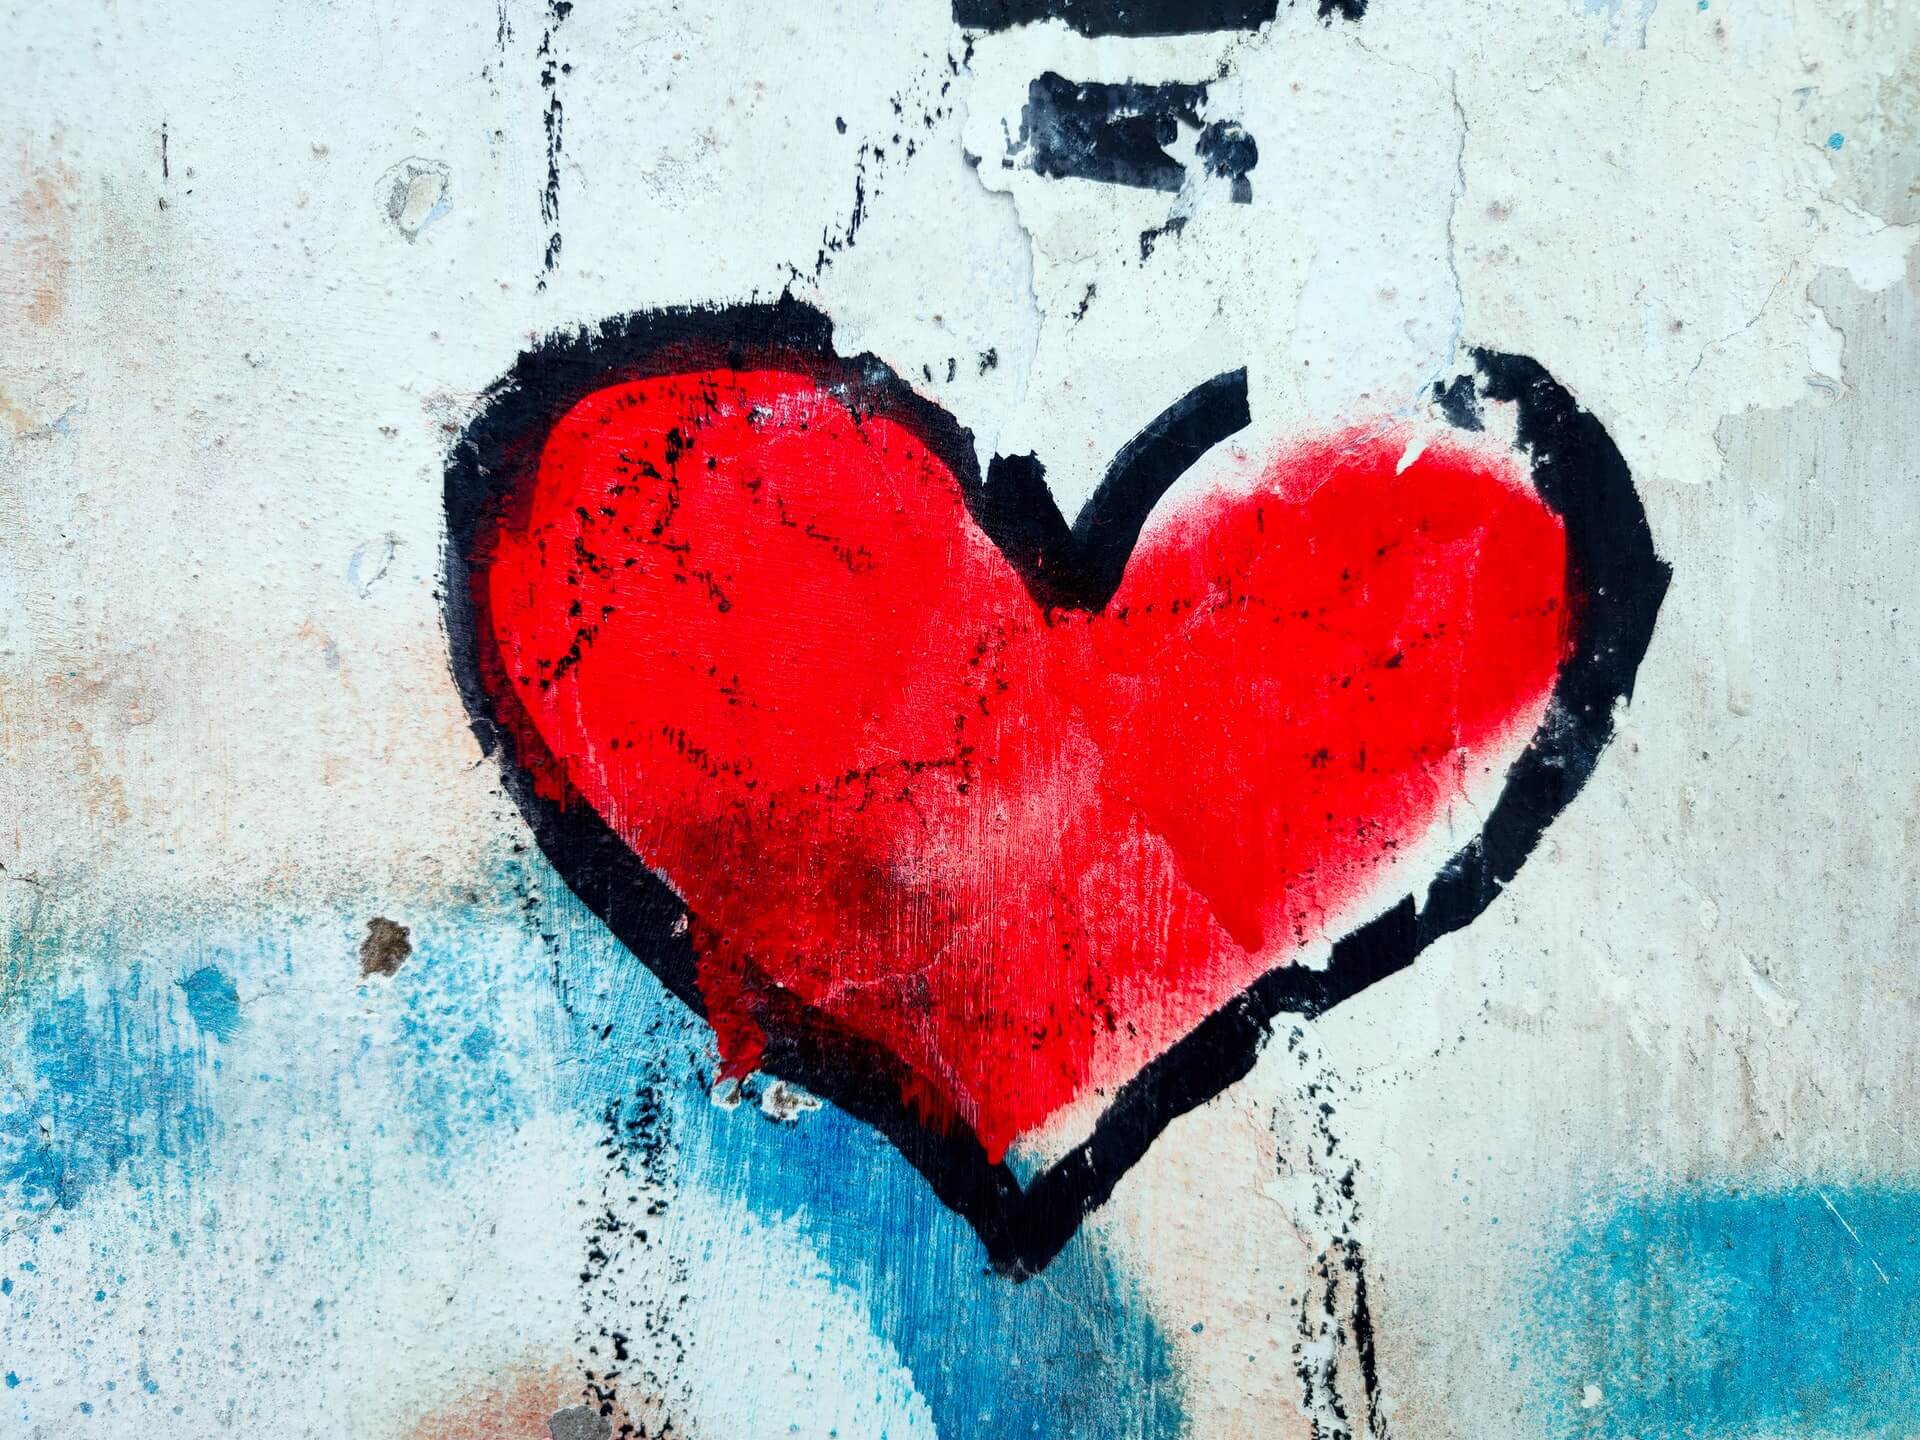 Red graffiti heart with black outline on weathered, worn wall